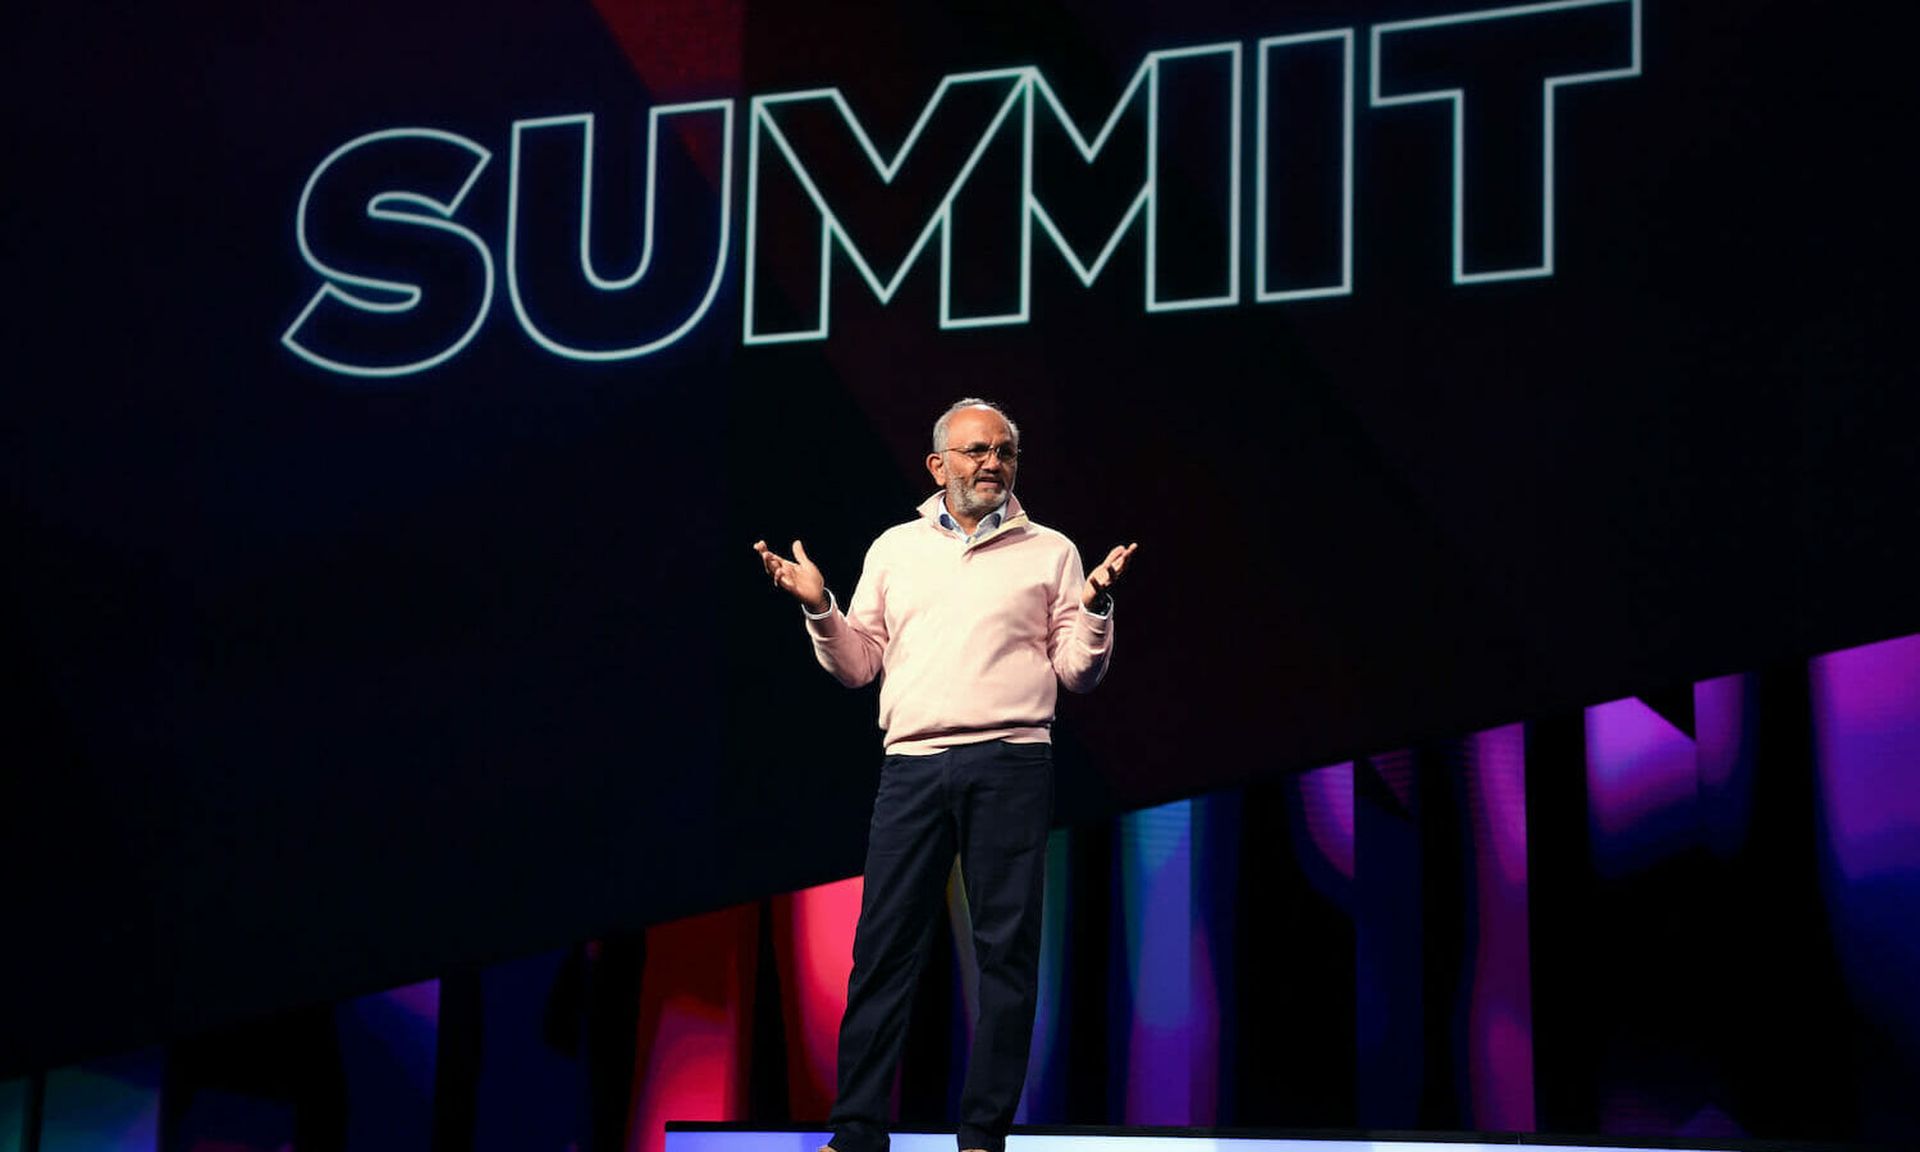 Adobe CEO Shantanu Narayen kicks off the 2019 Adobe Summit. Adobe announced in 2018 that support for Magento 1 would come to end in June 2020, and yet around 100,000 entities still use the dated platform. (Jeff Bottari/AP Images for Adobe)